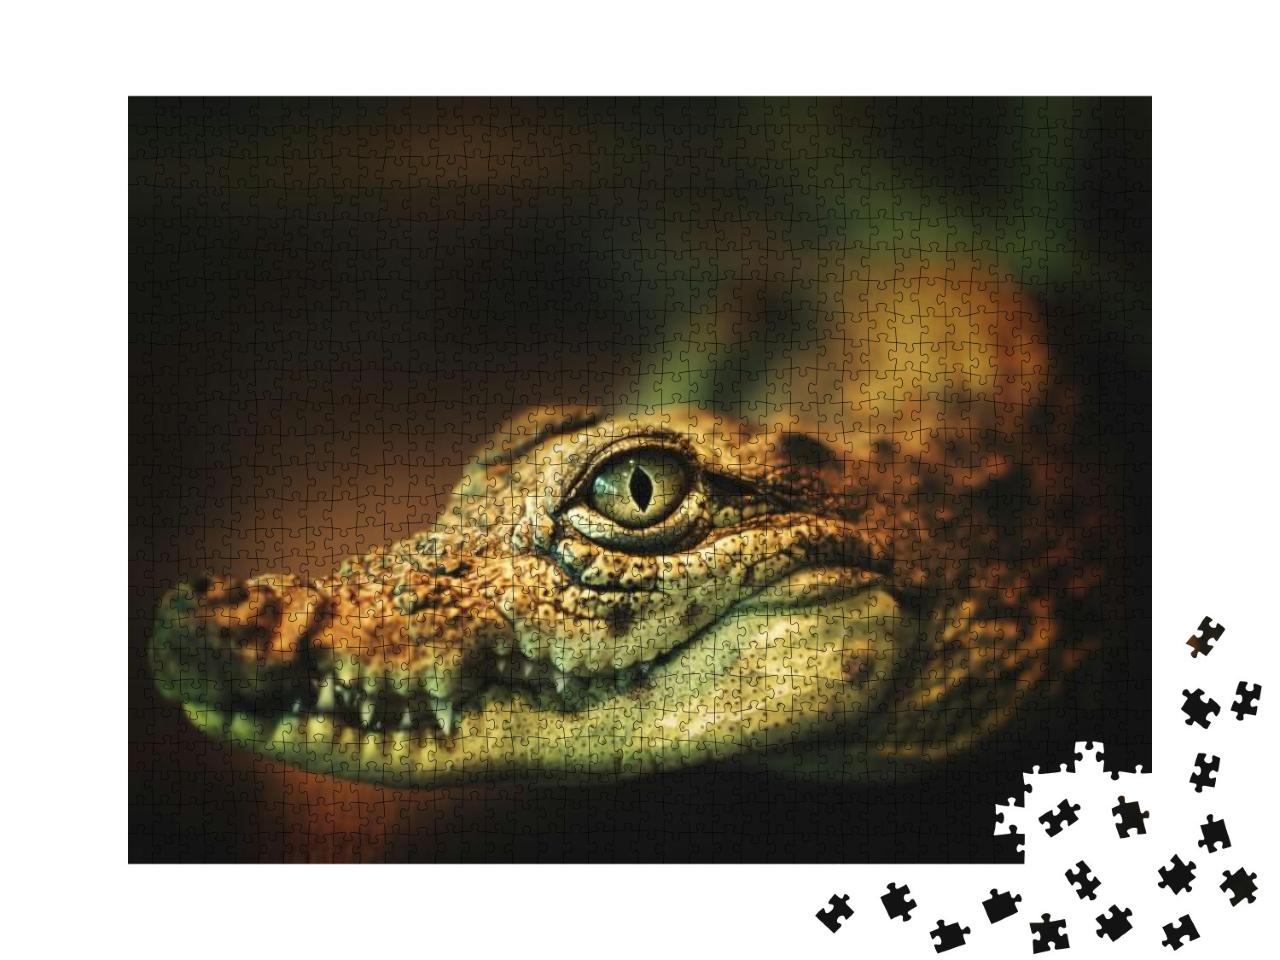 Crocodile Smiles. the Crocodiles Eyes Looking Directly At... Jigsaw Puzzle with 1000 pieces